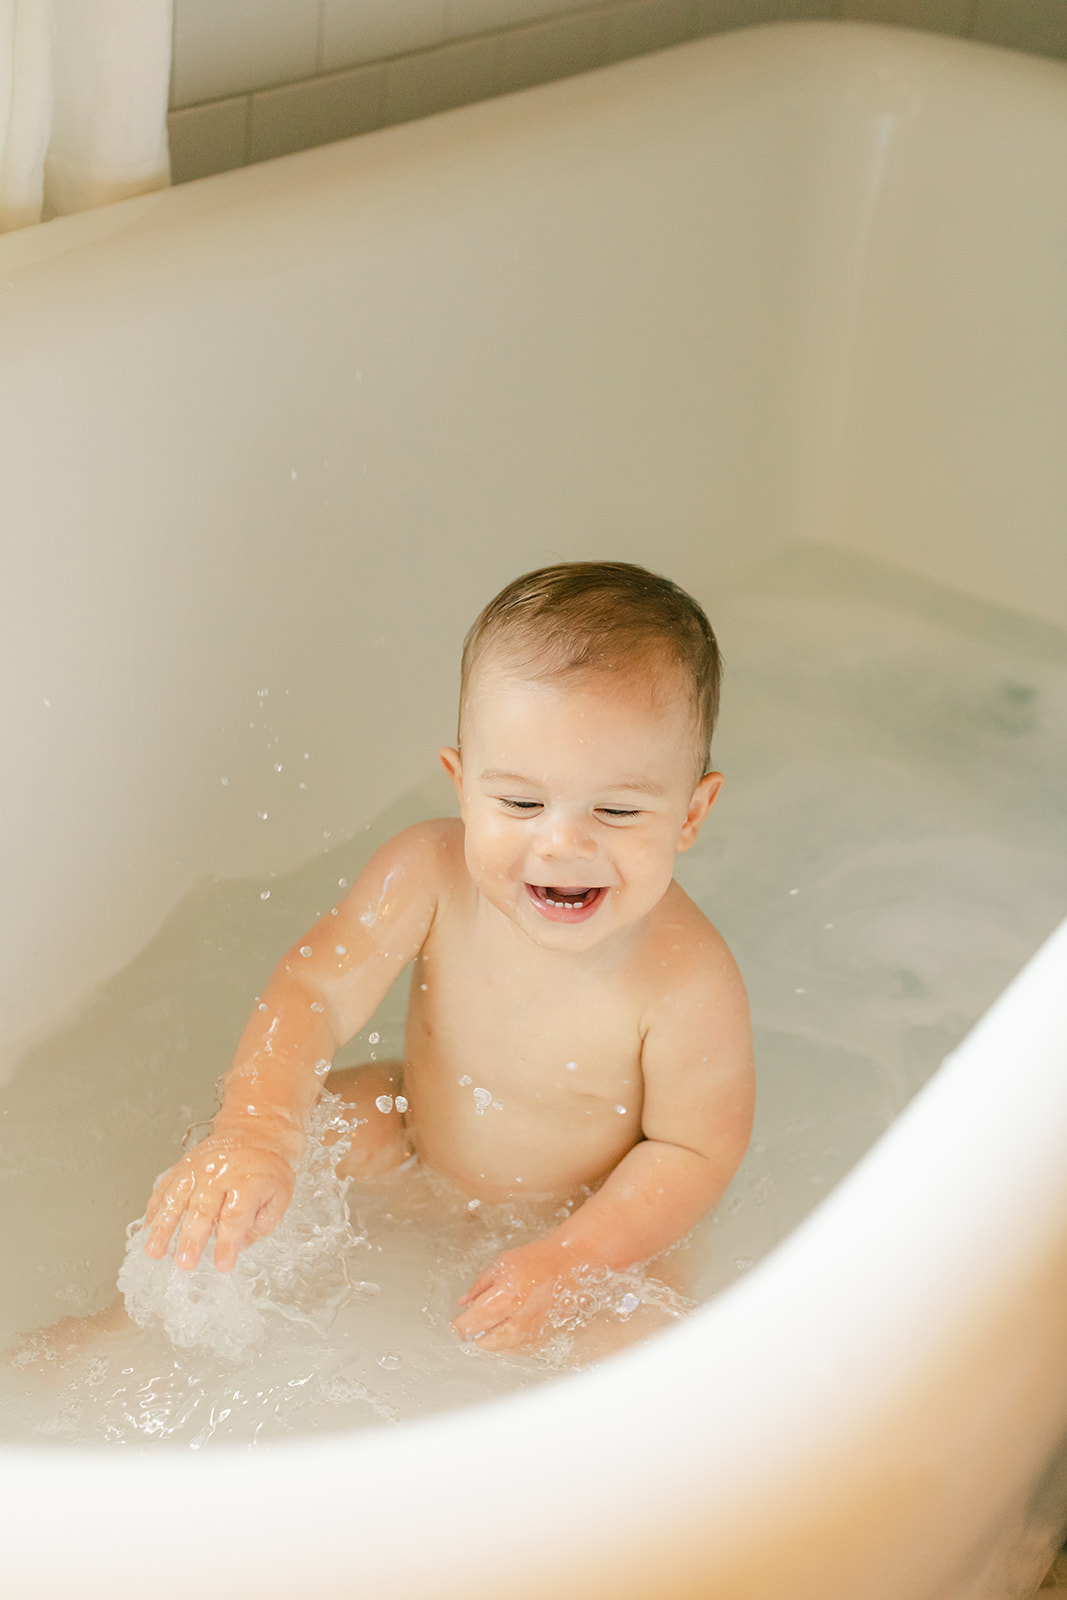 1 year milestone session for baby boy. Cozy at home session. baby in bathtub